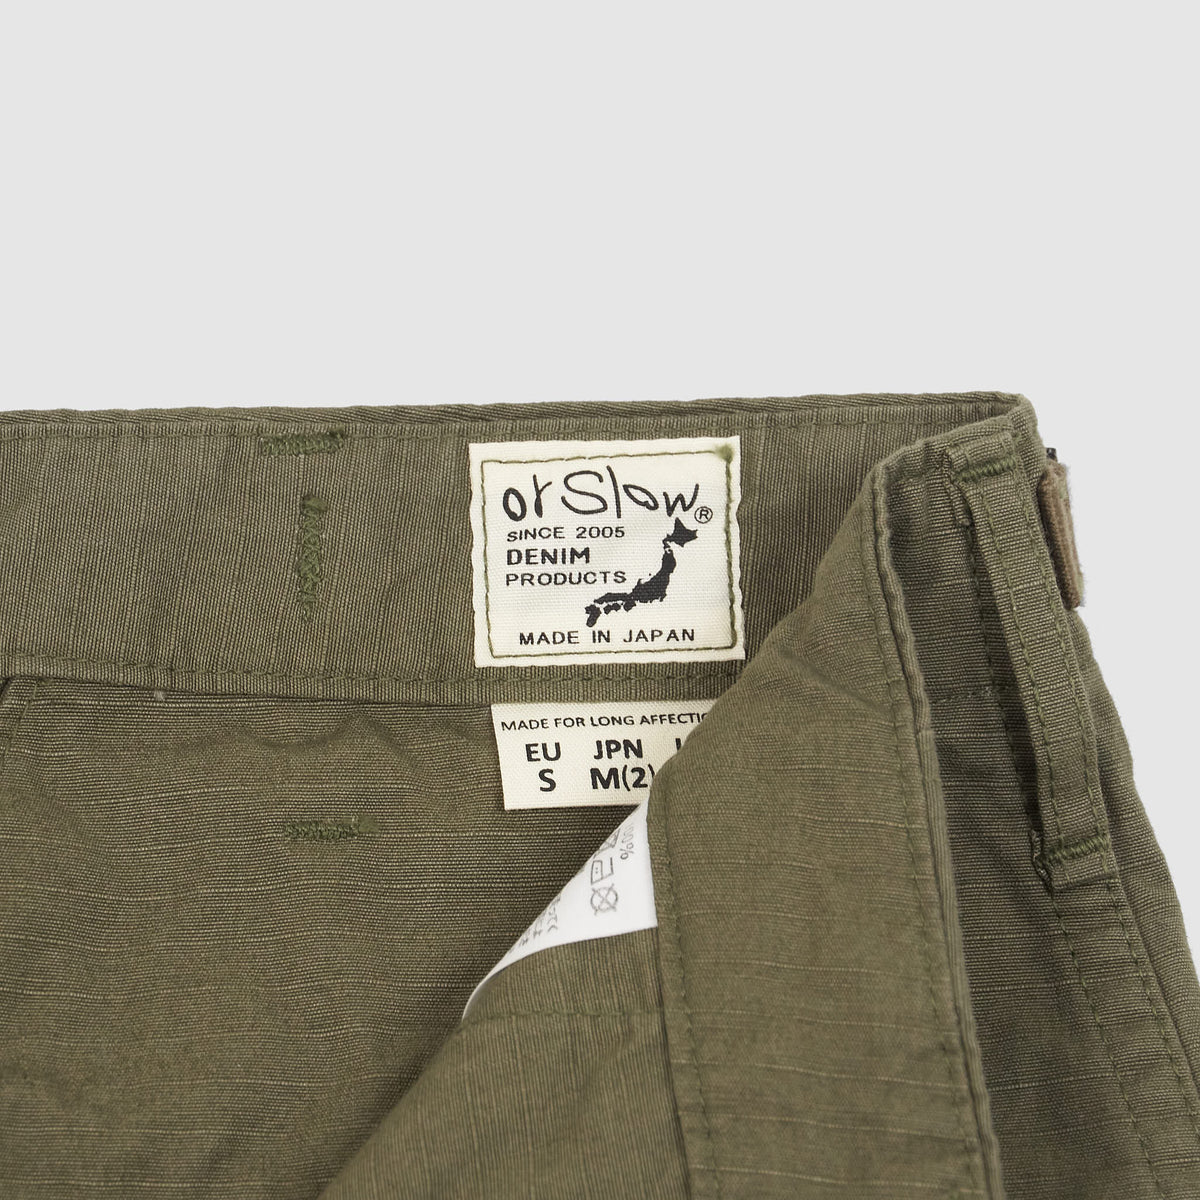 Orslow 6 Pocket Cargo Fatigue Pants Olive Ripstop - Made in Japan, Pants